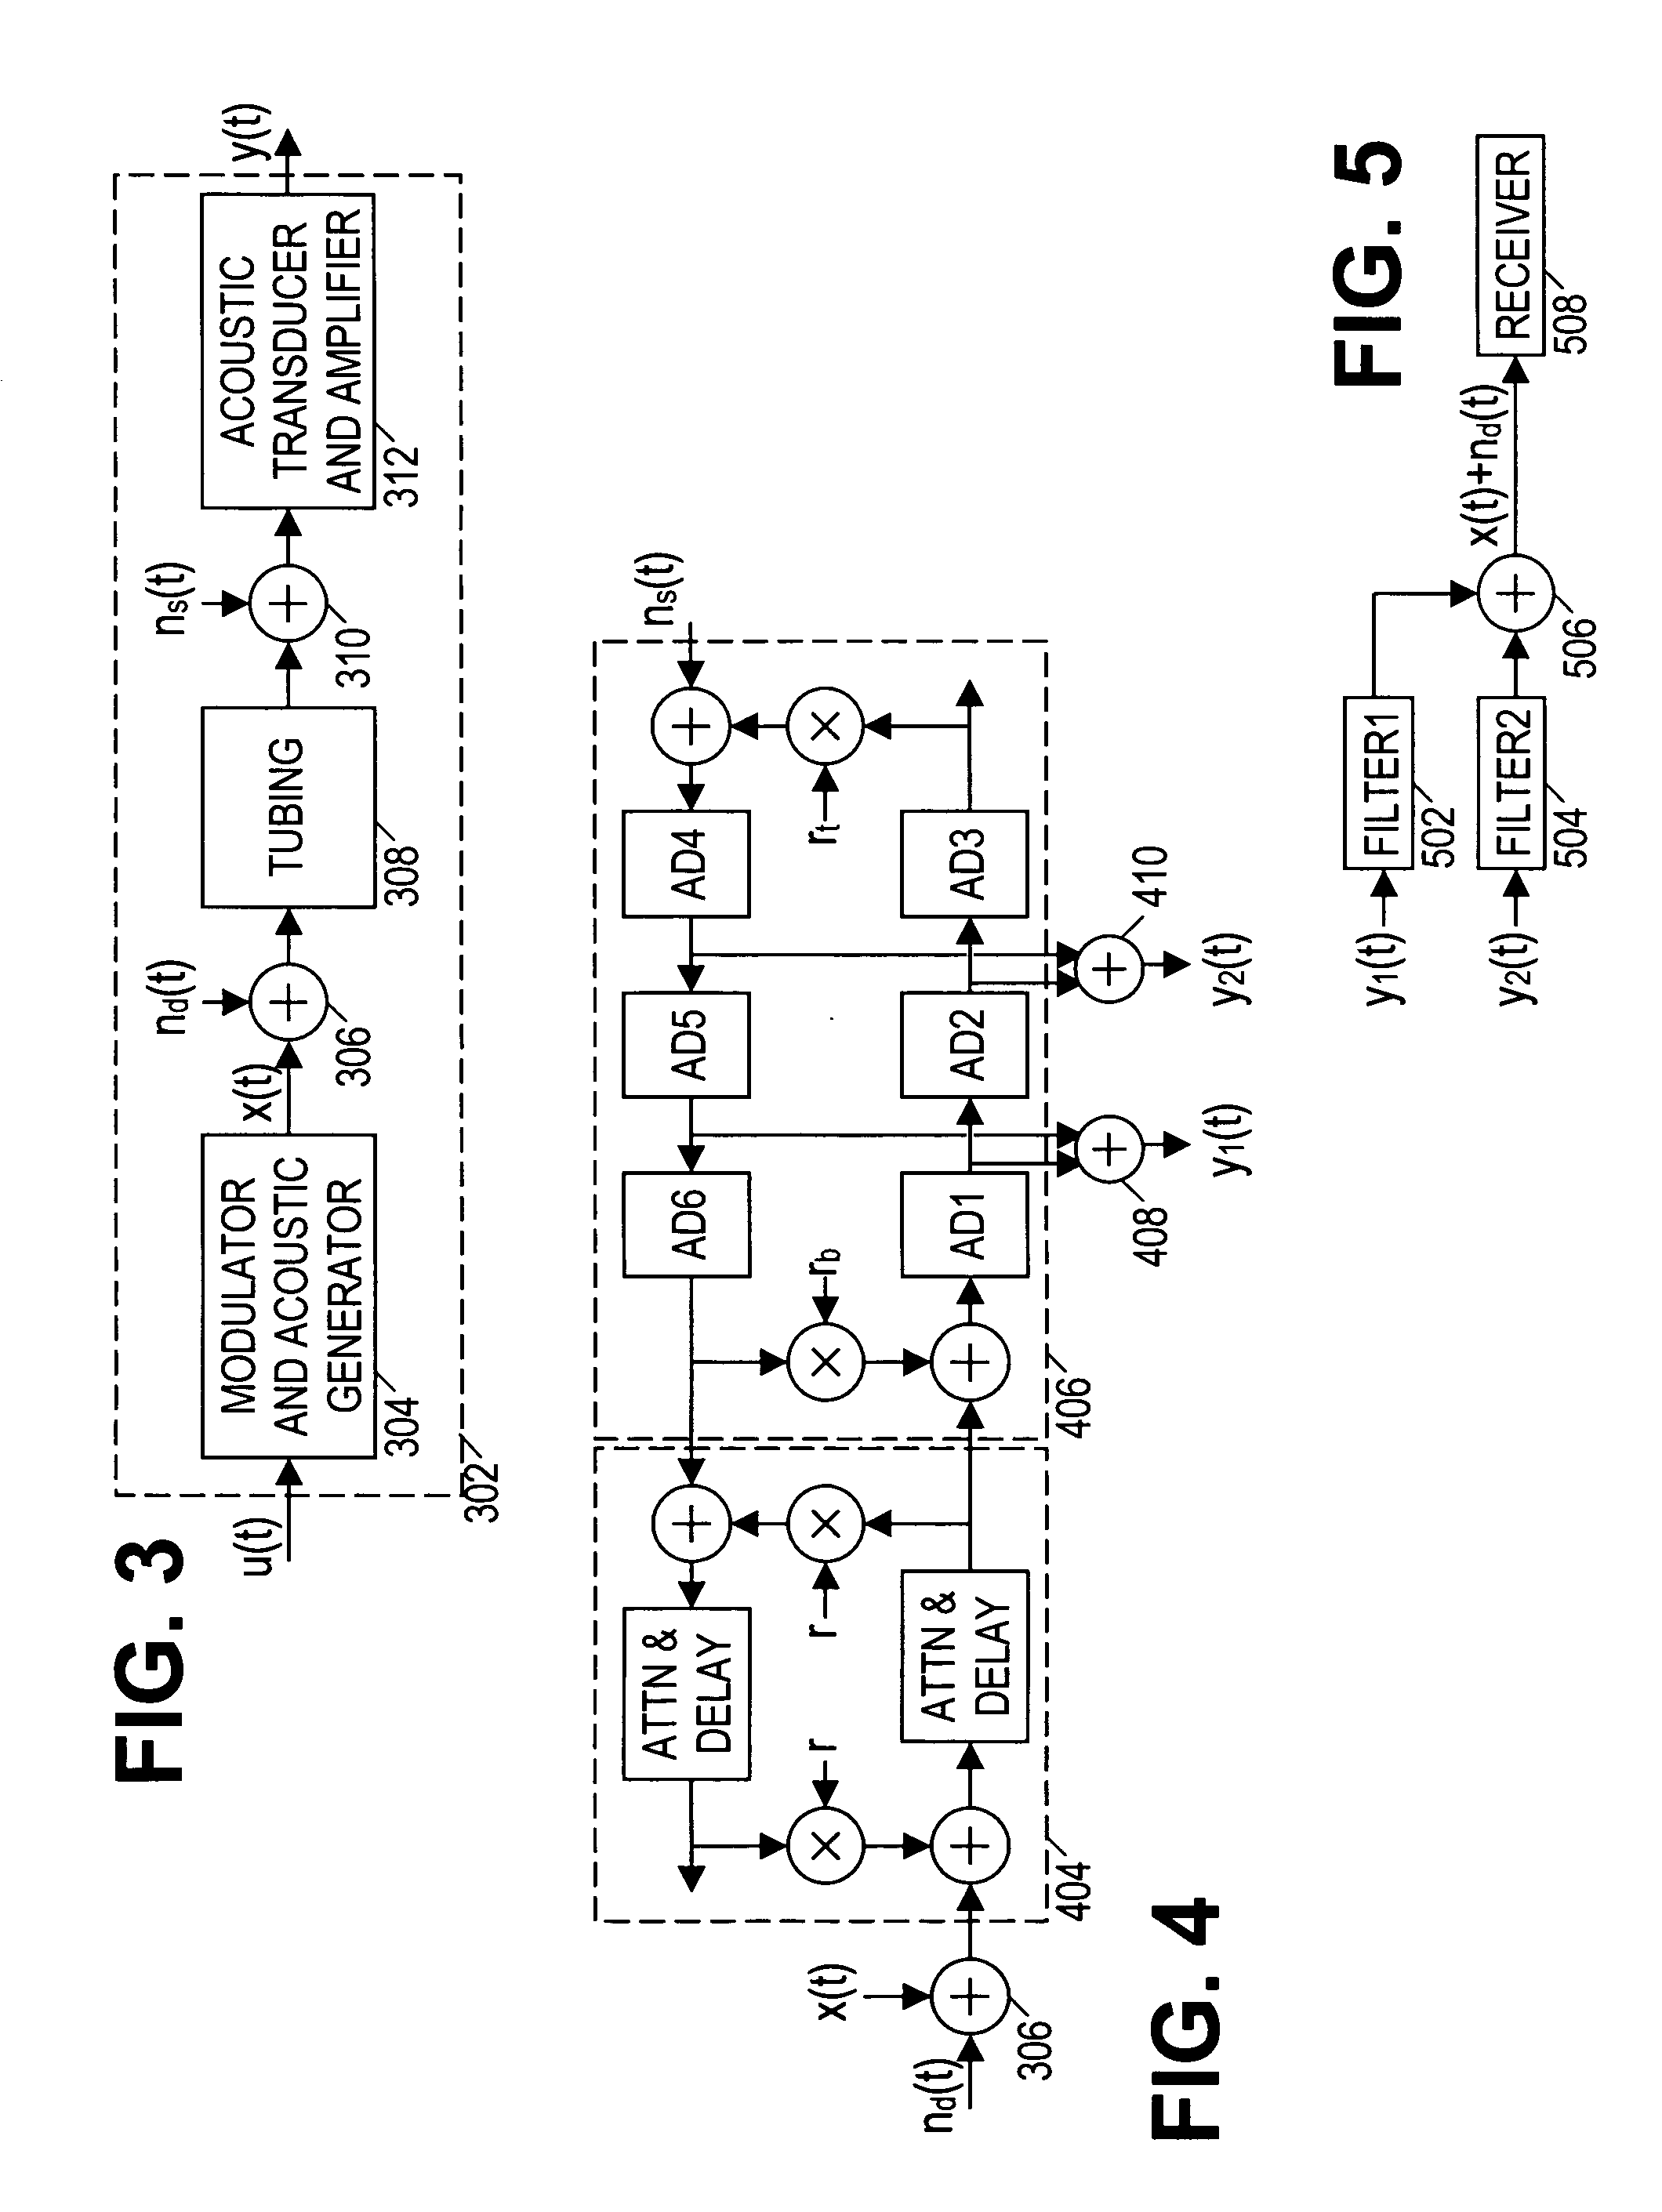 Directional acoustic telemetry receiver